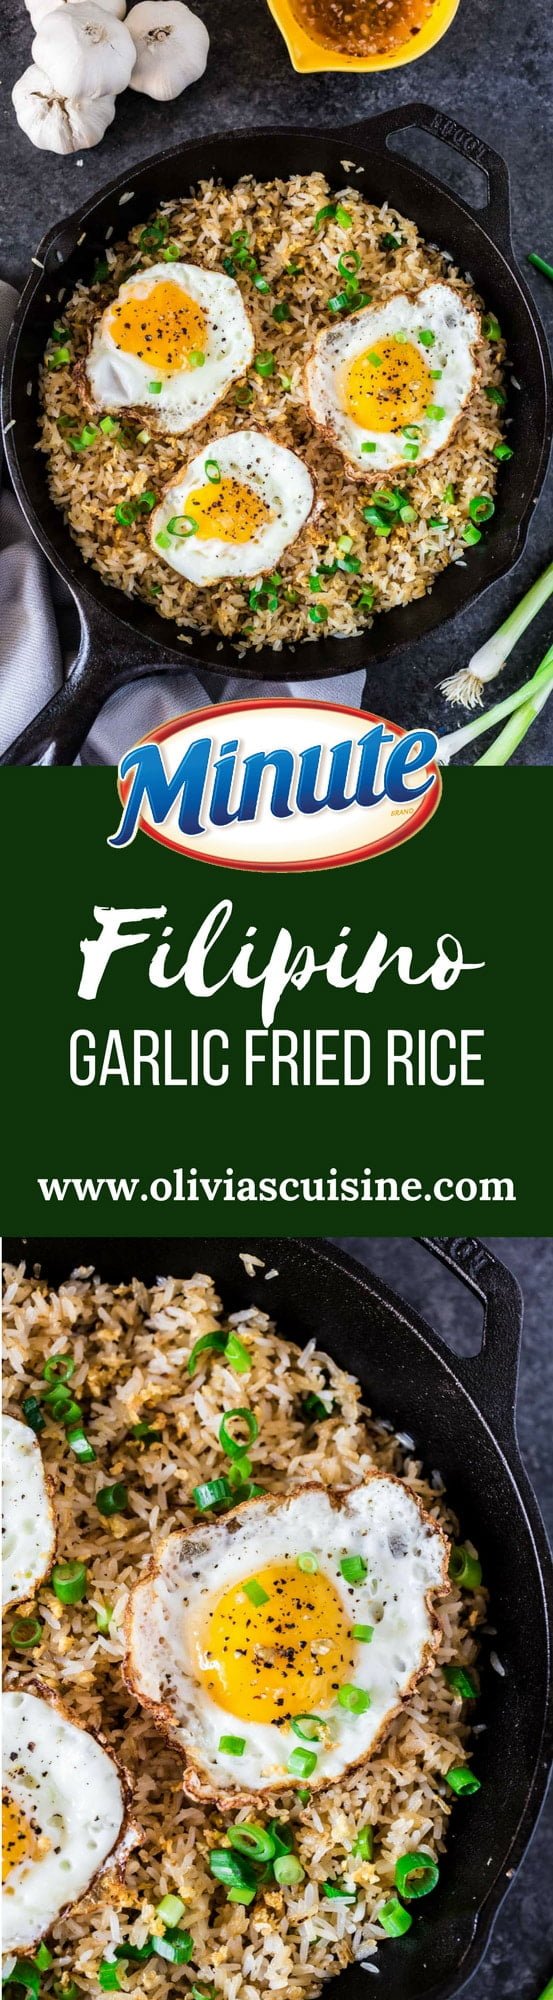 Filipino Garlic Fried Rice | www.oliviascuisine.com | Sinangag, or Garlic Fried Rice, is a popular Filipino breakfast, often served with a fried egg on top and a drizzle of vinegar sauce. Don't have a stomach for rice and garlic in the morning? No problem! This dish is also amazing for lunch or as a side for dinner.